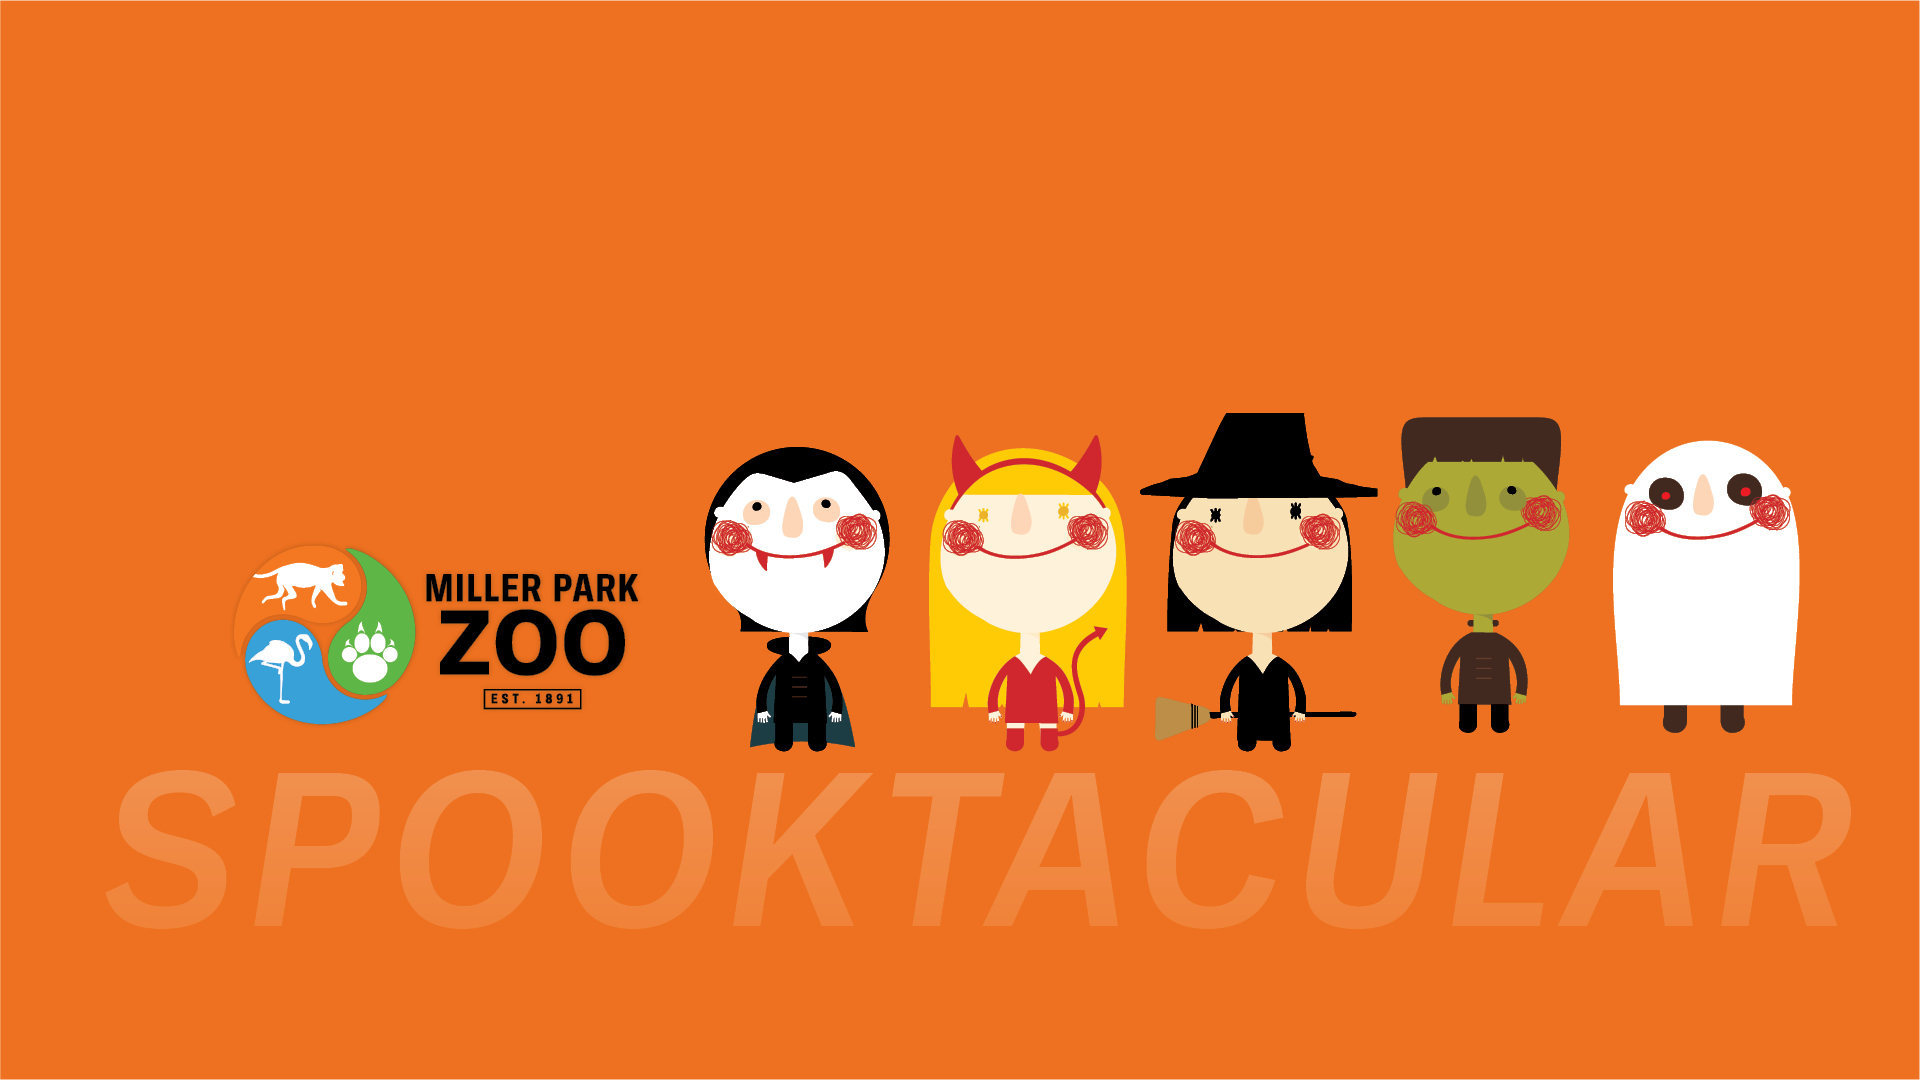 Spooktacular at the Zoo!